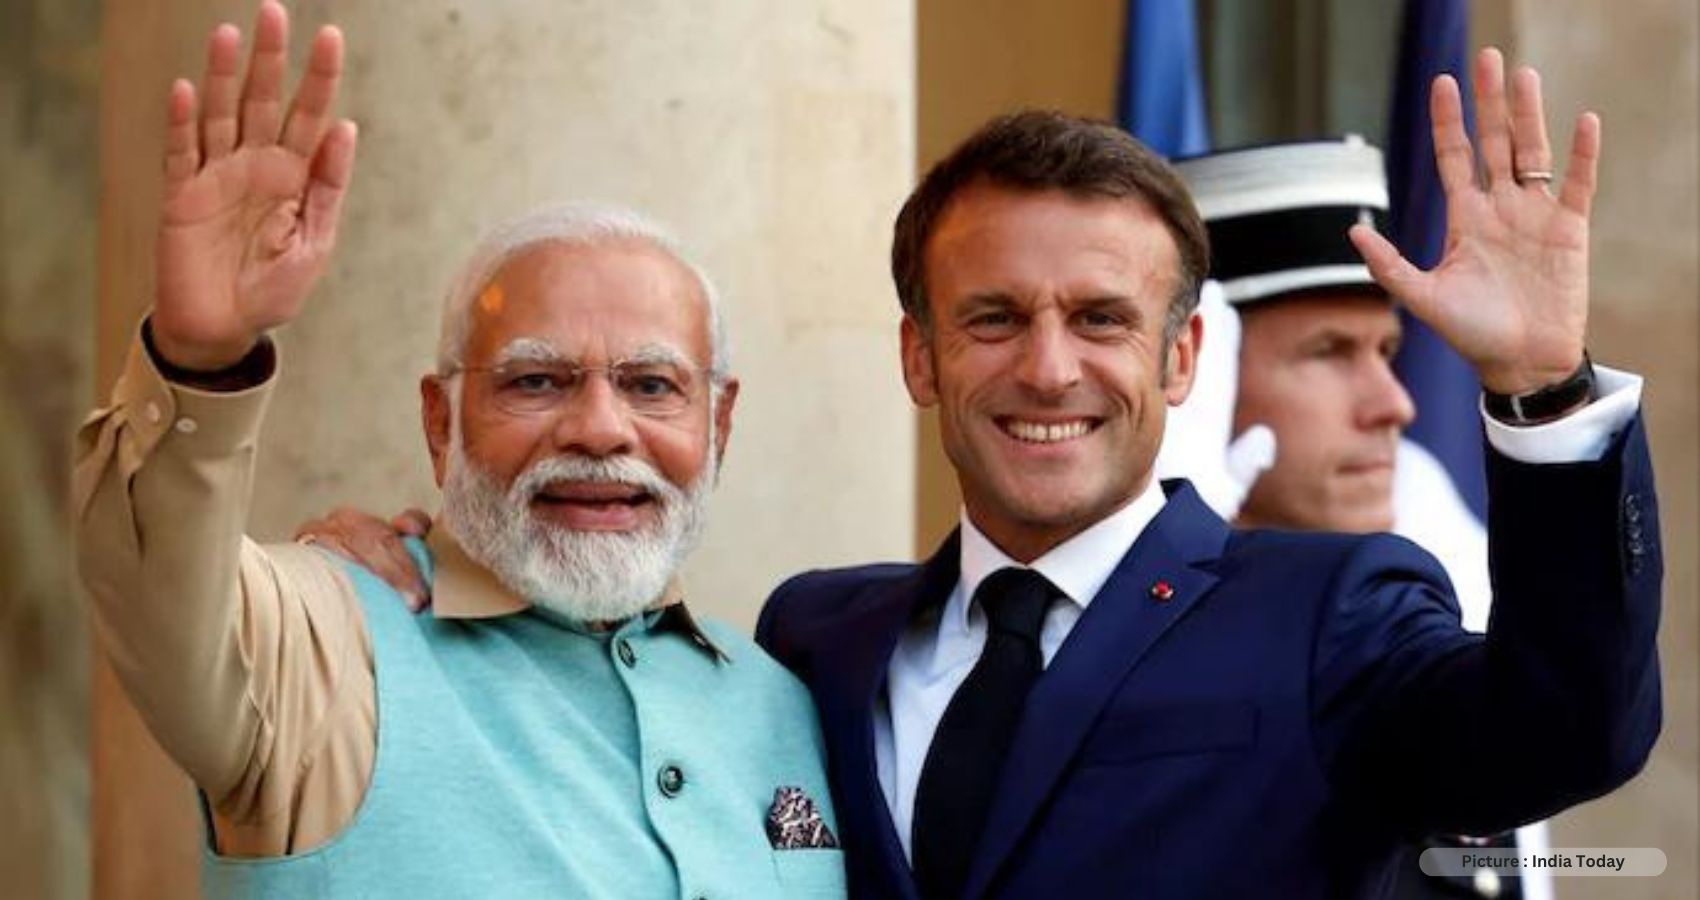 “France An Important Partner In Make In India”